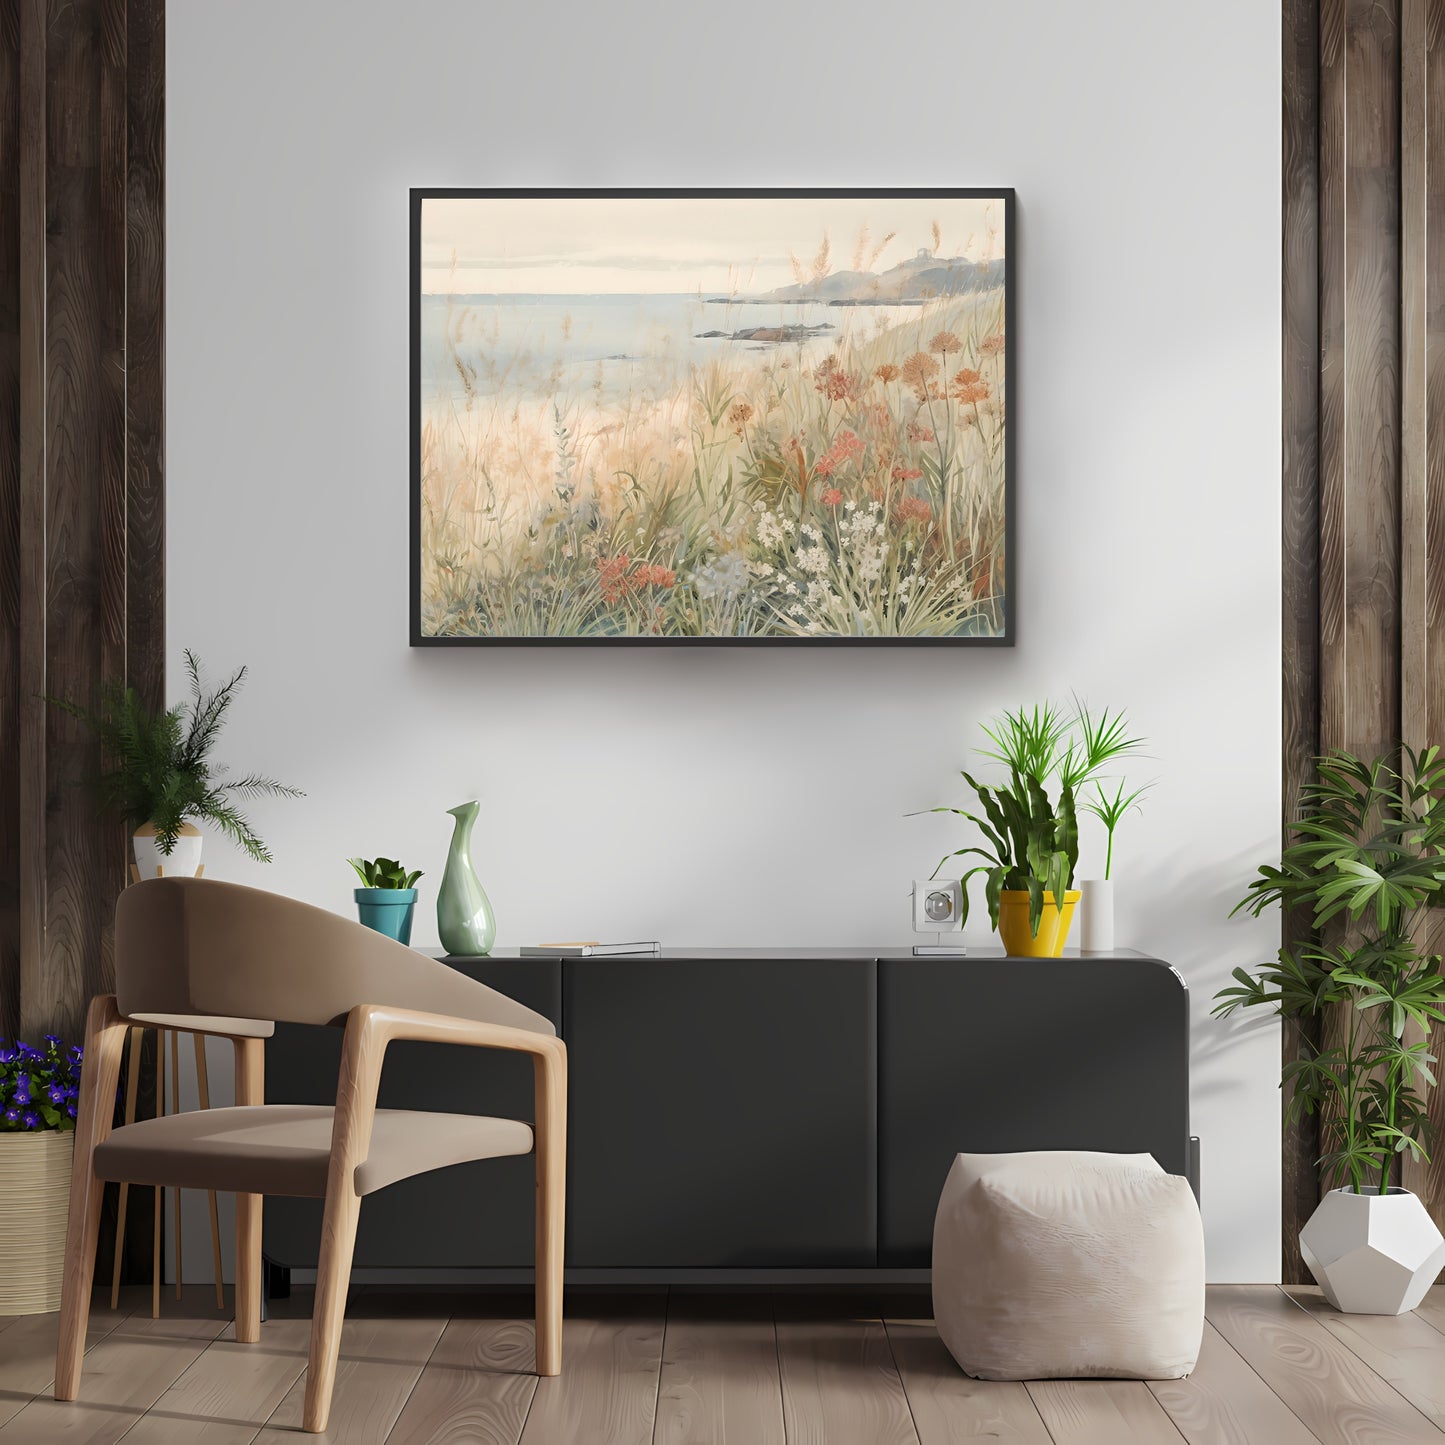 French Coastal Wildflower Meadow Watercolor Painting Paper Poster Prints Hills, Blooming Flowers, Seaside Village, Rustic Home Decor Art, Pastel Colors